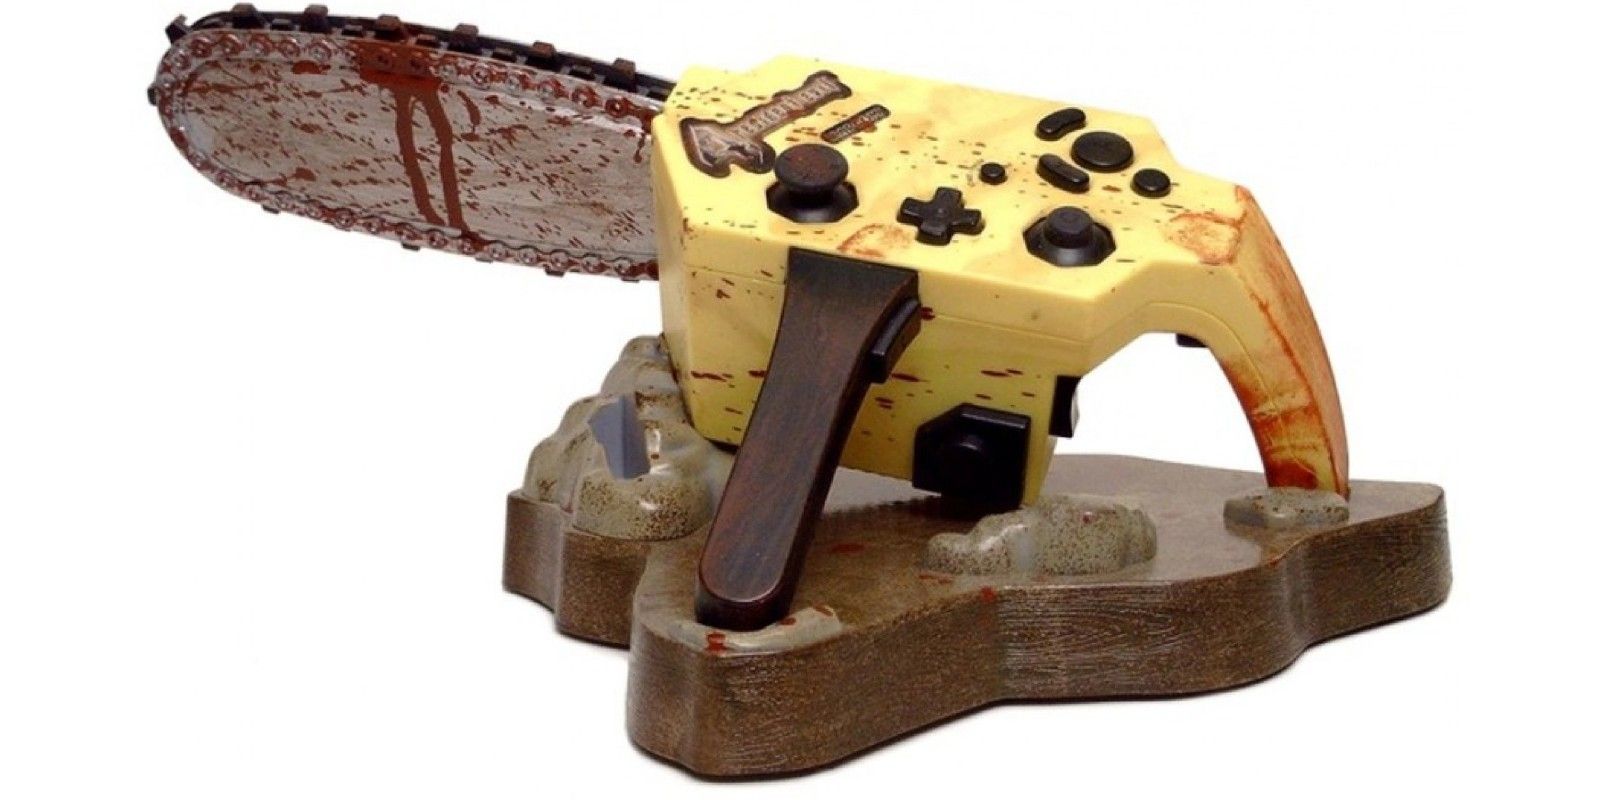 Resident Evil 4 Chainsaw for the GameCube